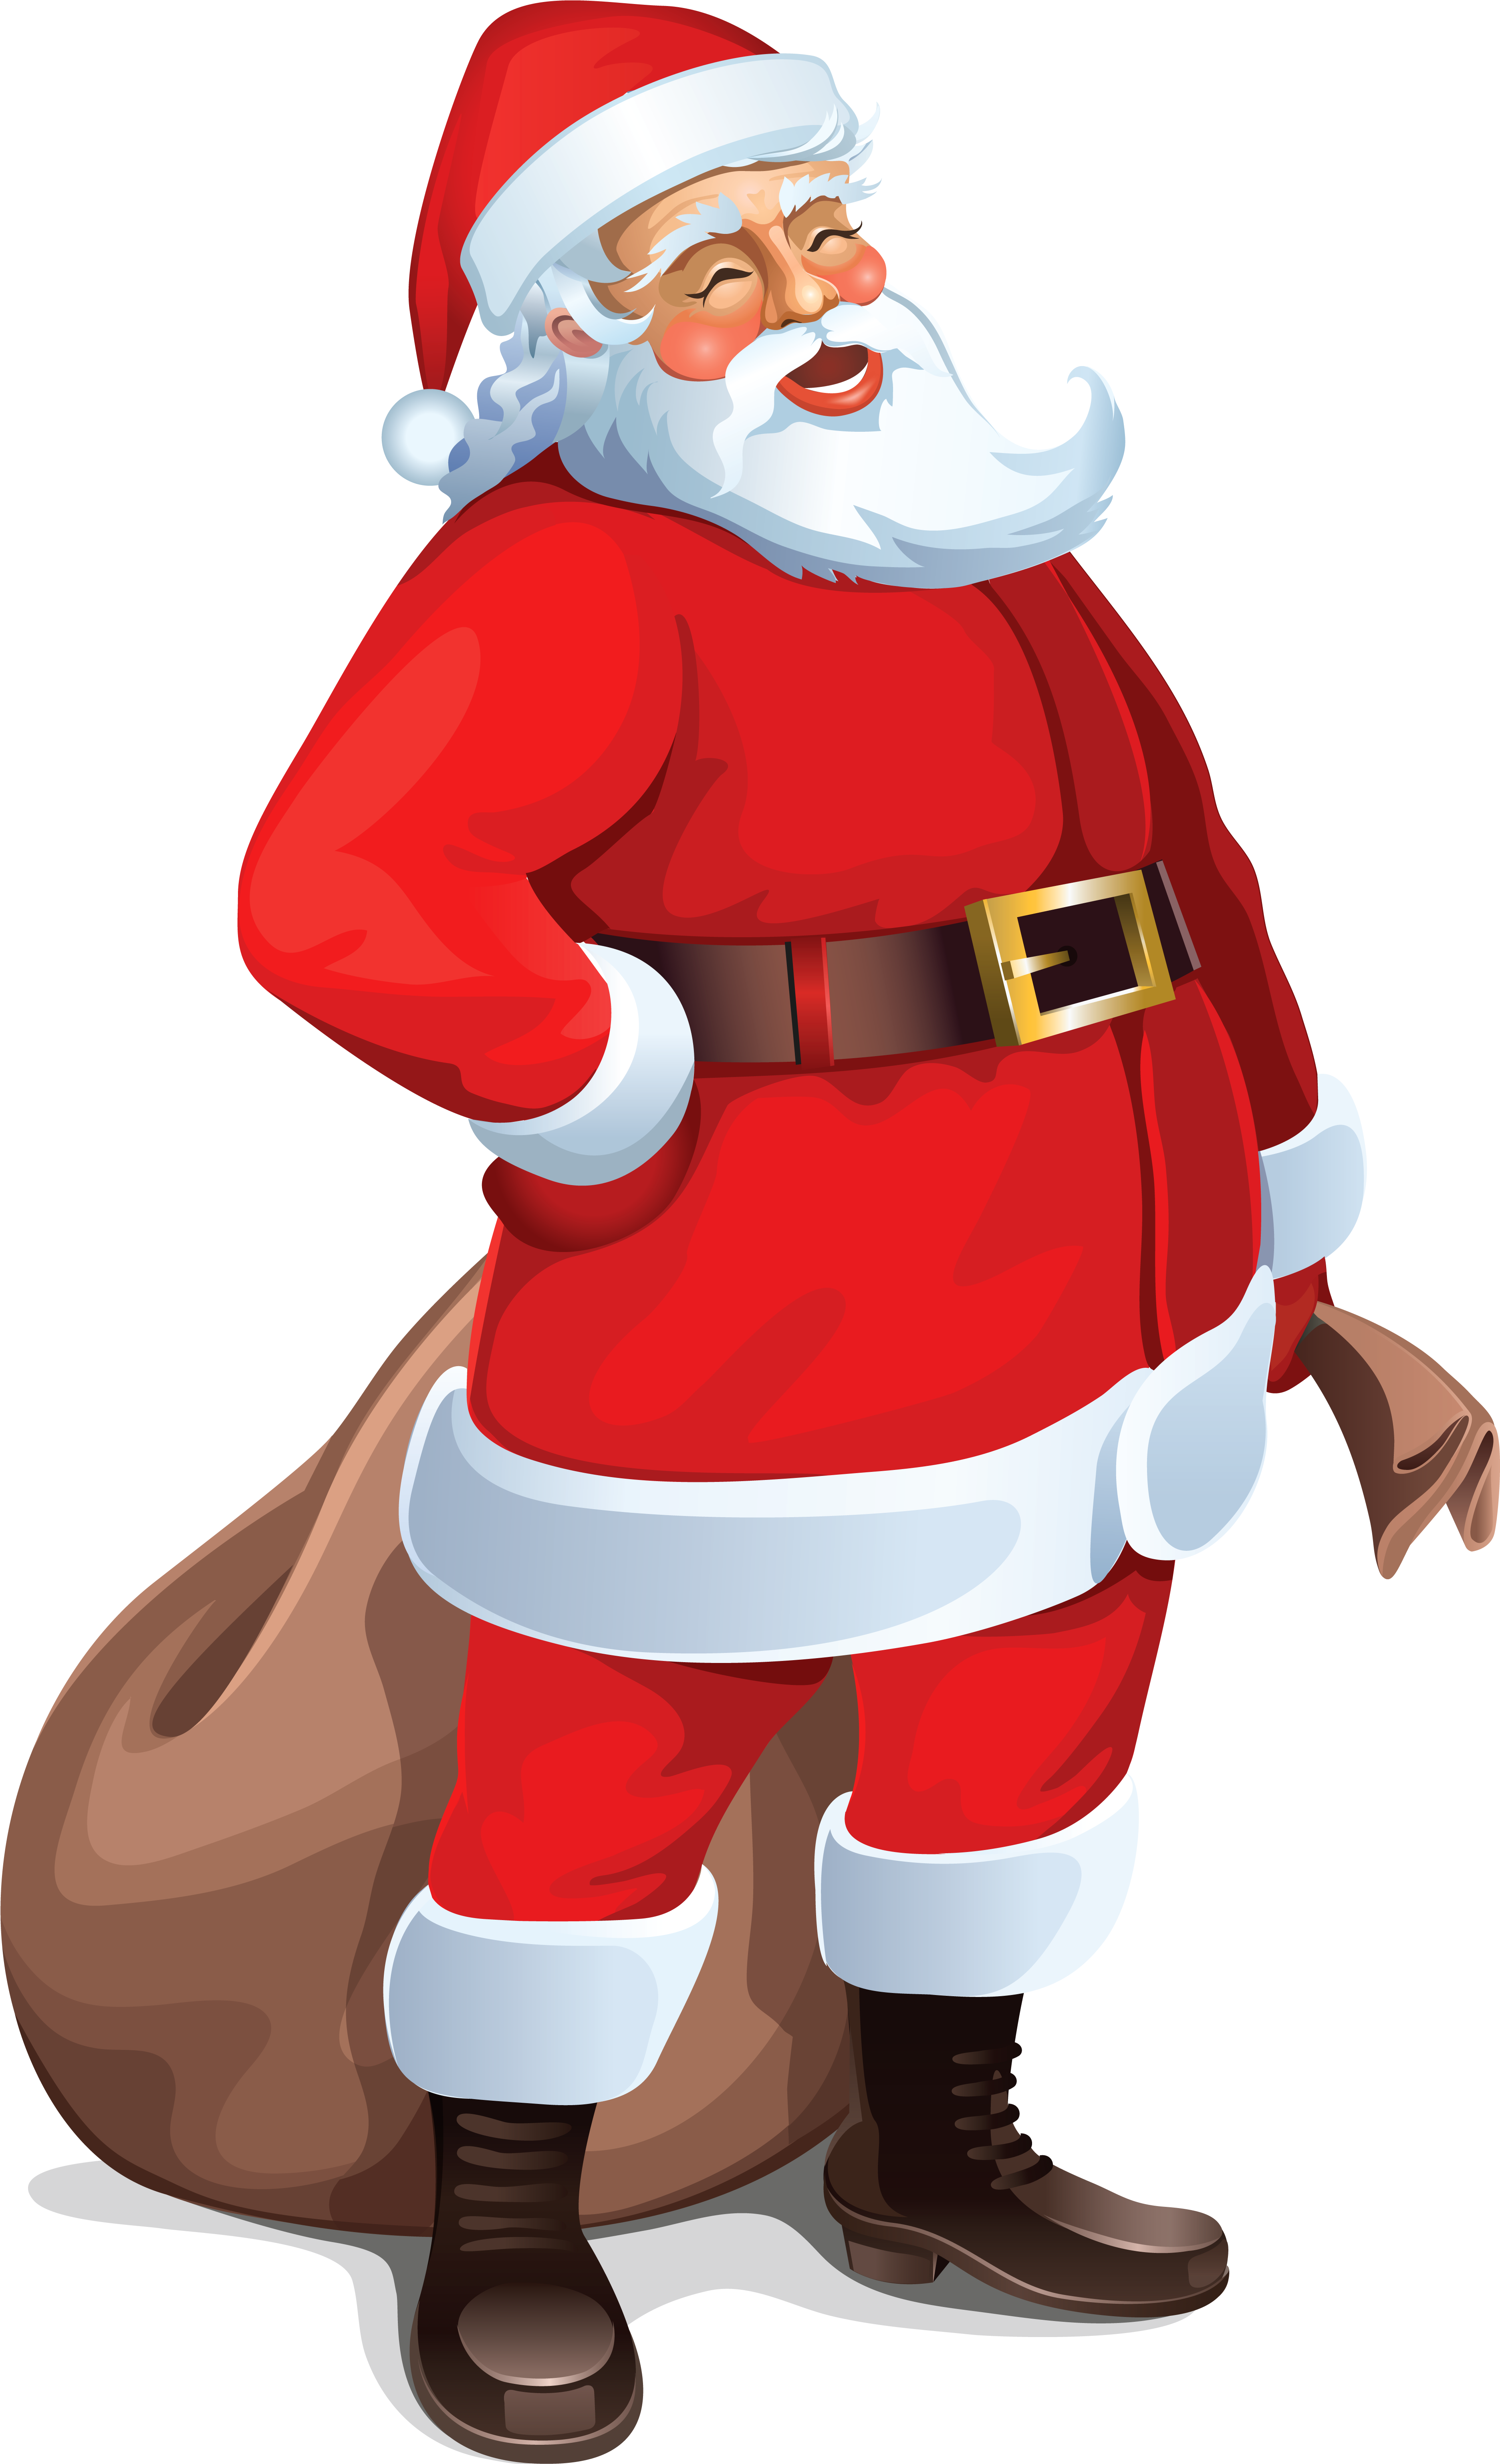 download-jolly-santa-clauswith-sack-wallpapers